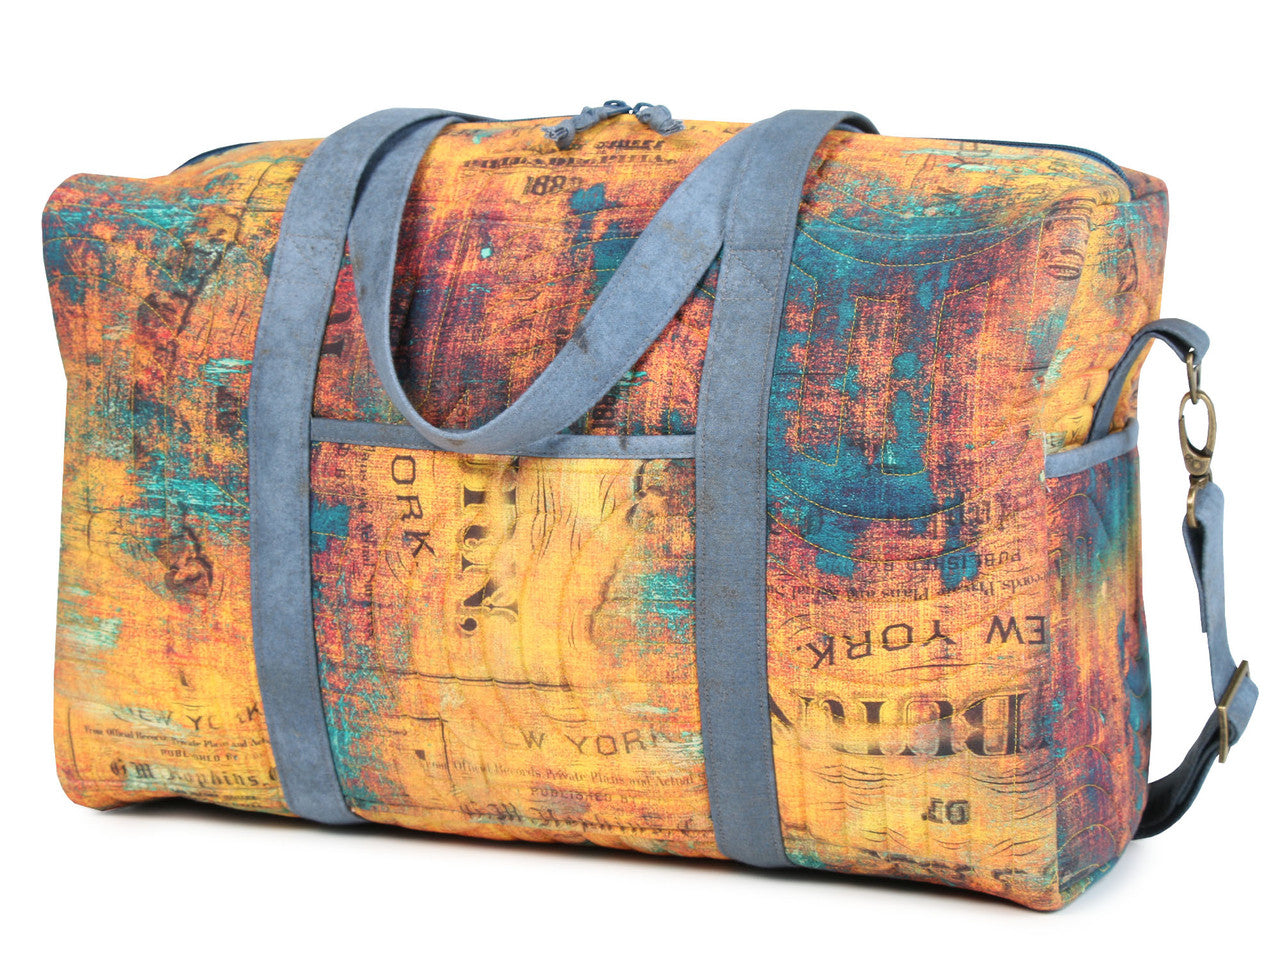 Get Out of Town Duffle 2.1 Pattern ByAnnie_sample1b